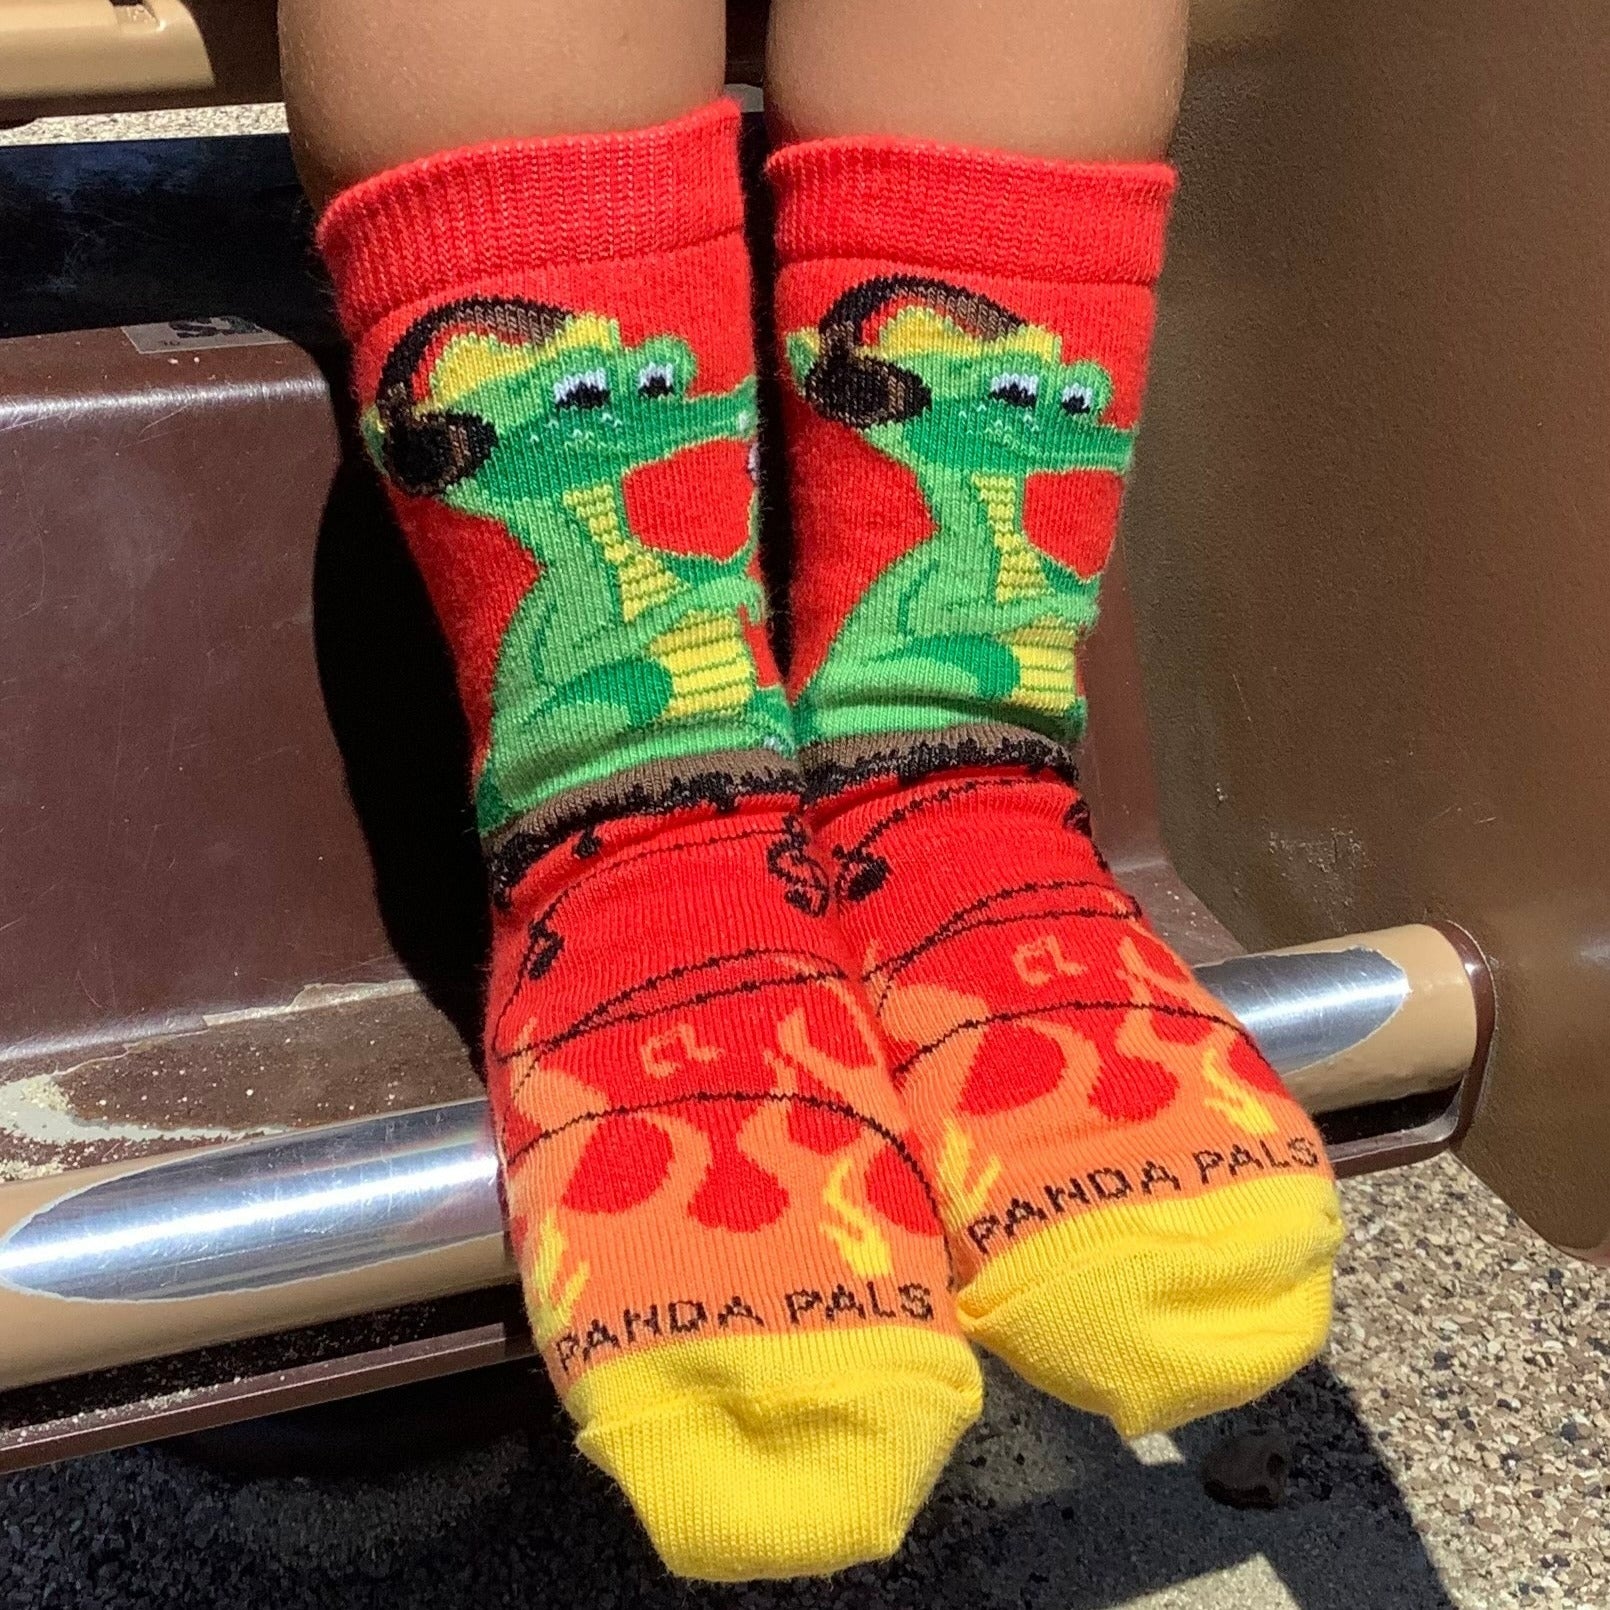 Music Dragon on Fire Socks (Ages 3-7) from the Sock Panda